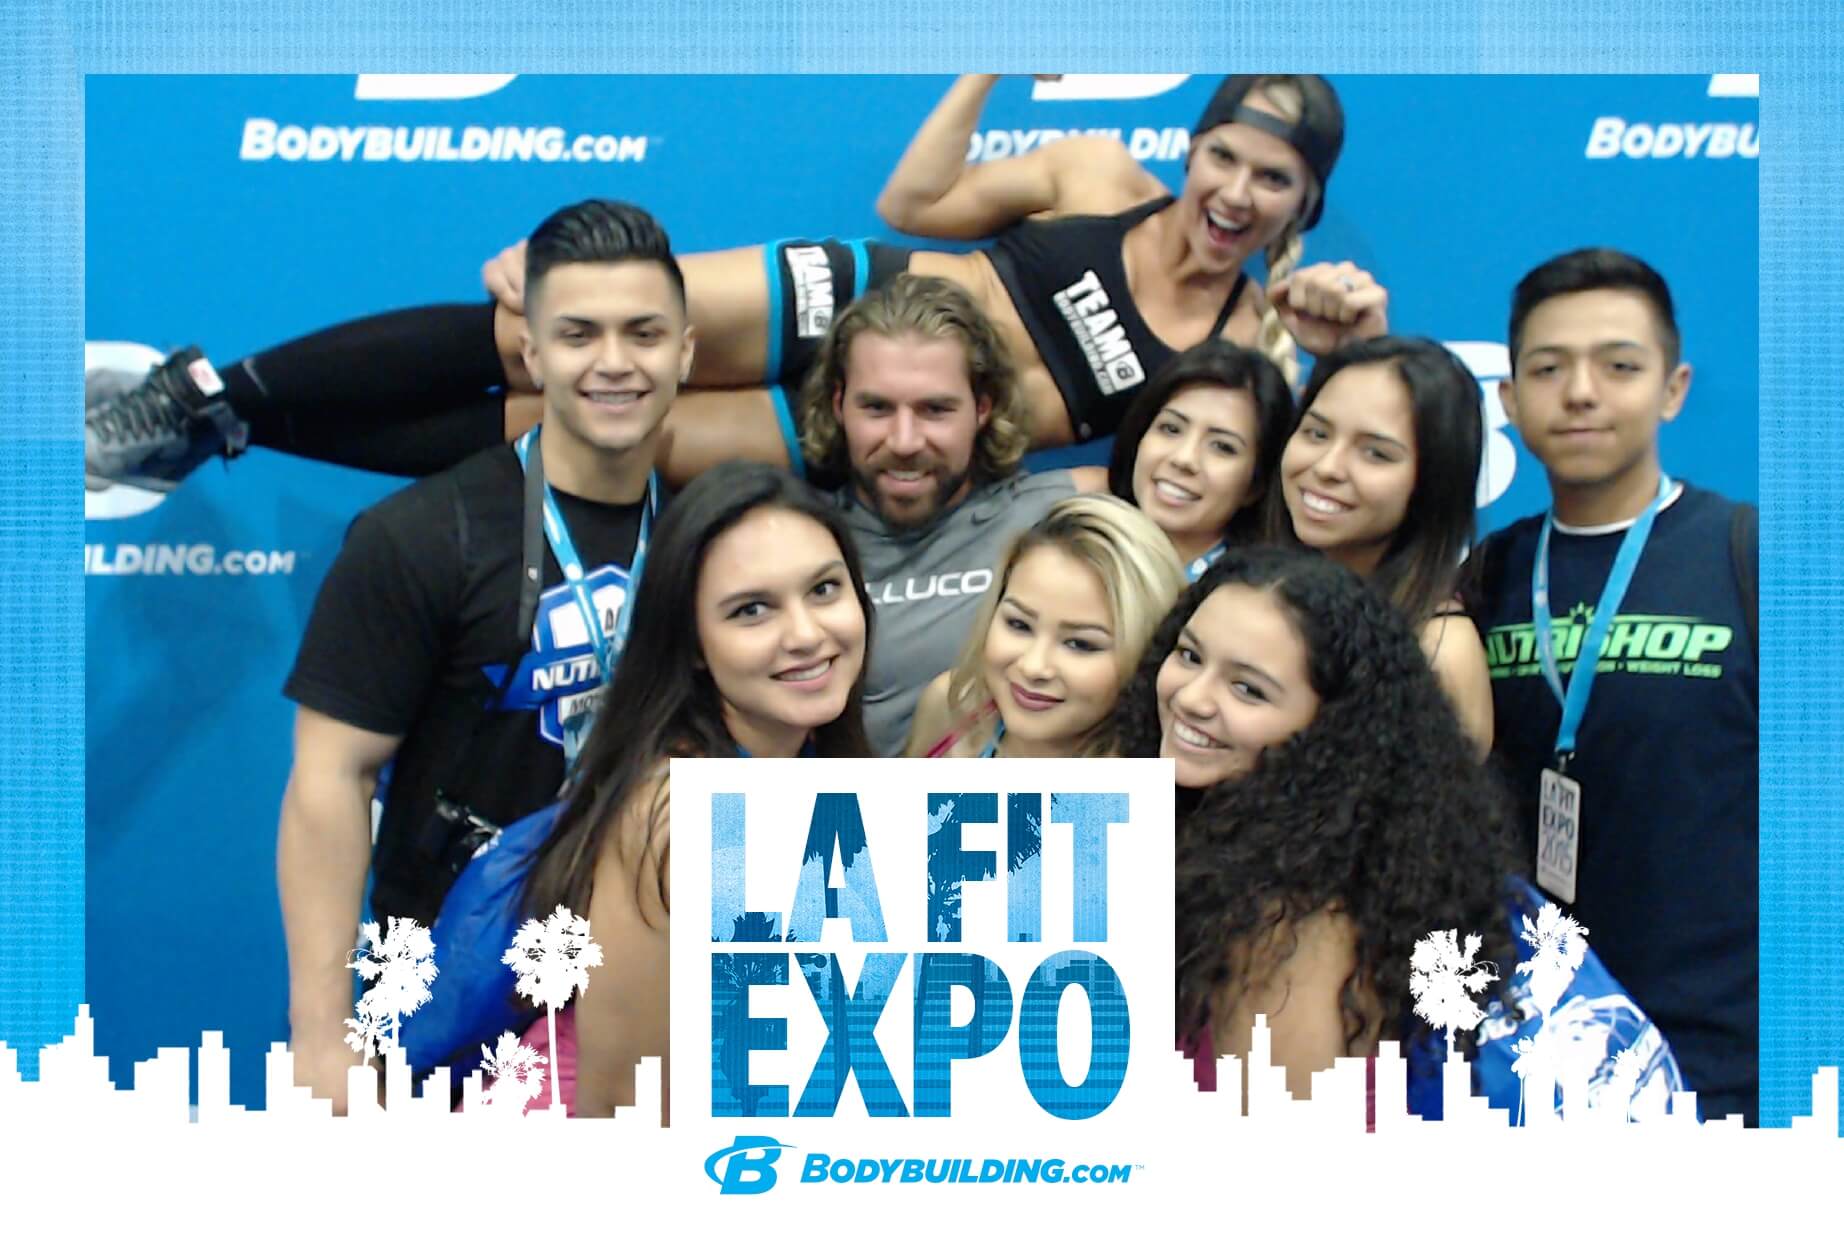 LA Fit Expo Photo Booth Kiosk